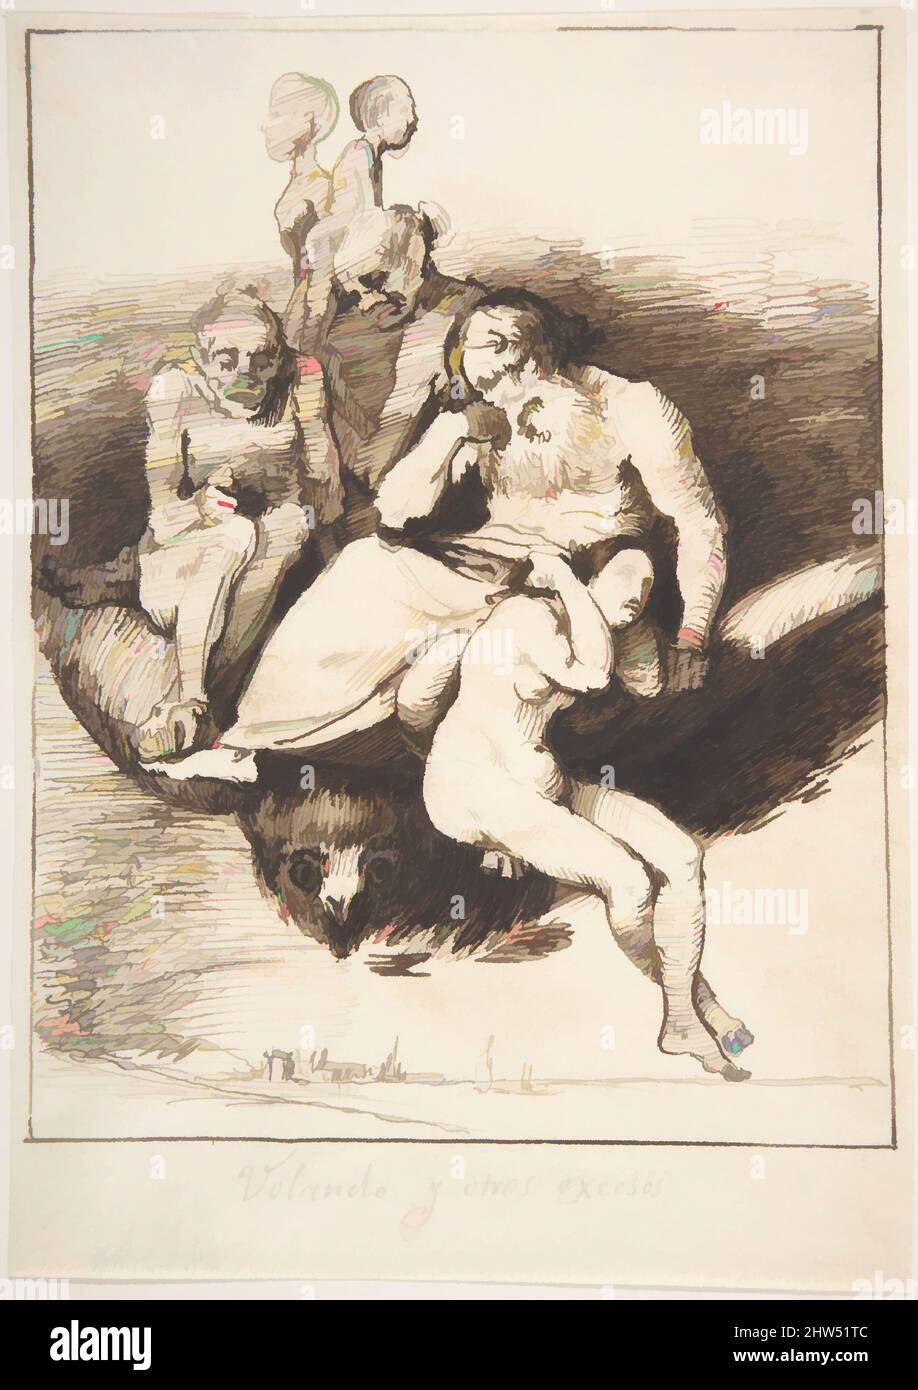 Art inspired by Flying and Other Excesses ('Volando y otros excesos'), 1807–45, Pen and dark brown ink. Composition reinforced in some places with brush and heavy application of ink. Composition outlined with pen and dark brown ink on all sides. Traces of graphite underscript under, Classic works modernized by Artotop with a splash of modernity. Shapes, color and value, eye-catching visual impact on art. Emotions through freedom of artworks in a contemporary way. A timeless message pursuing a wildly creative new direction. Artists turning to the digital medium and creating the Artotop NFT Stock Photo